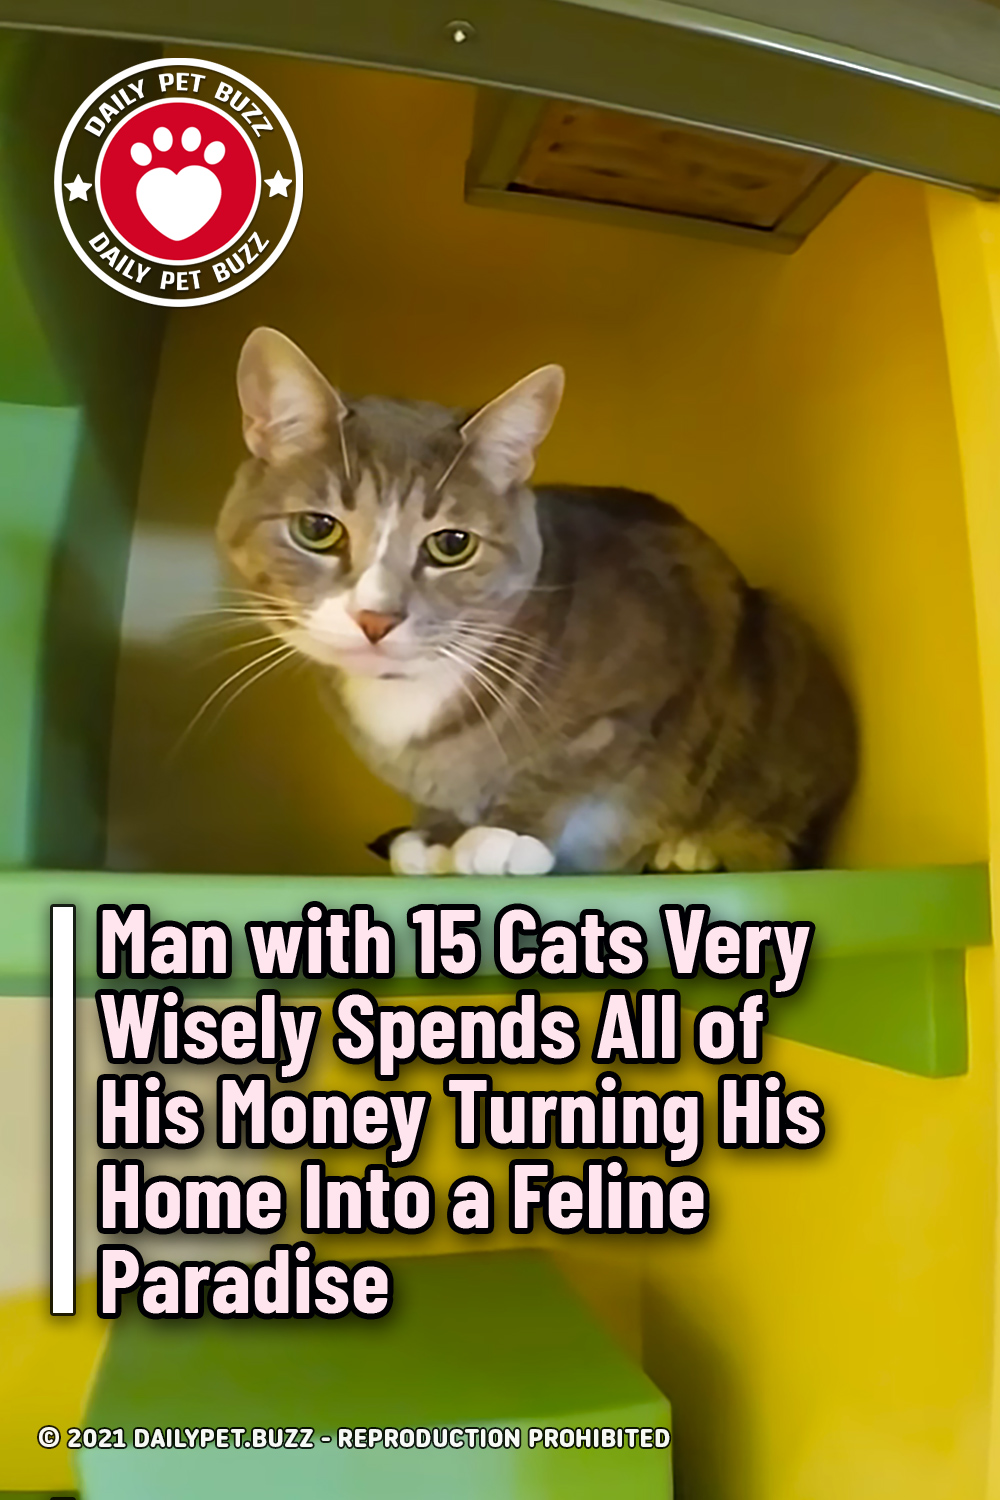 Man with 15 Cats Very Wisely Spends All of His Money Turning His Home Into a Feline Paradise